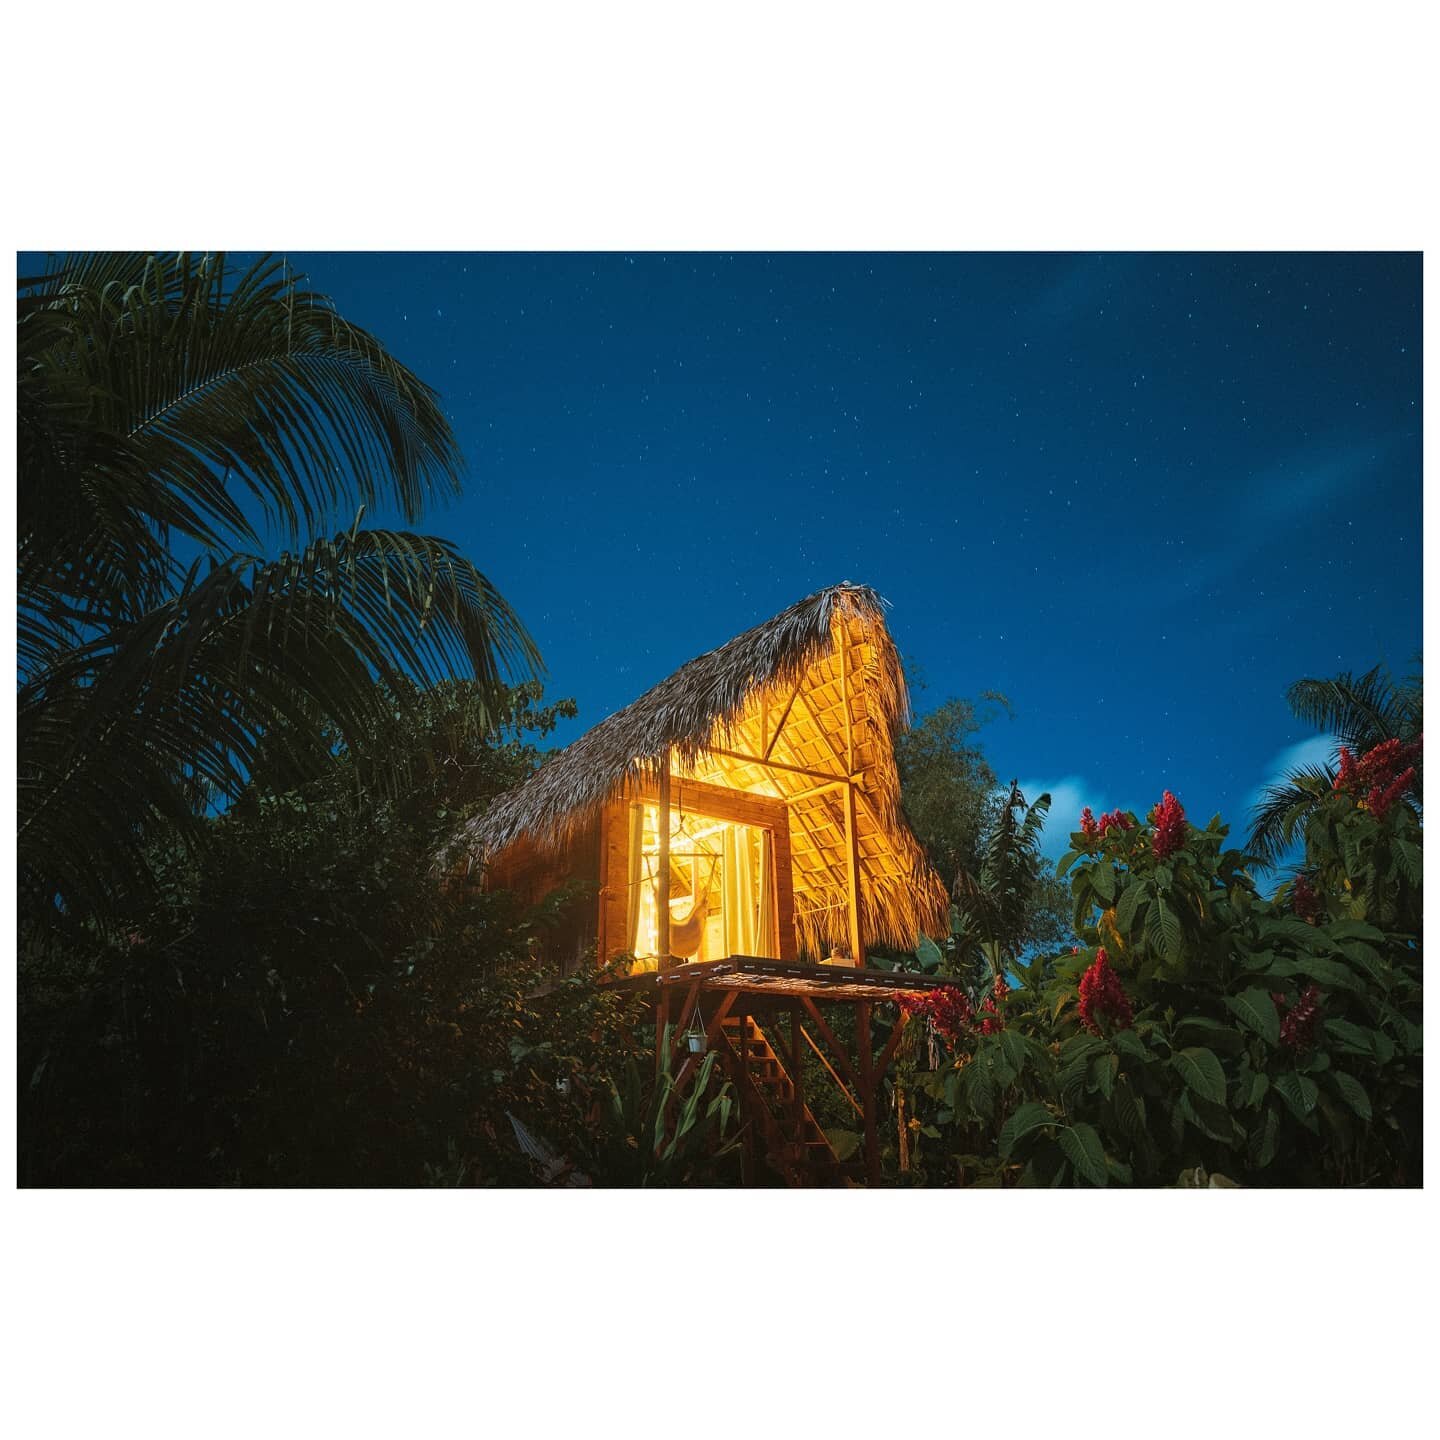 I felt like a kid again last night. 
3AM, moonlight, starlight, treehouse in the jungle...
I couldn't ask for a more magical feeling!

This image is composed of two shots: one exposed for the highlights and the other for the shadows so I get maximum 